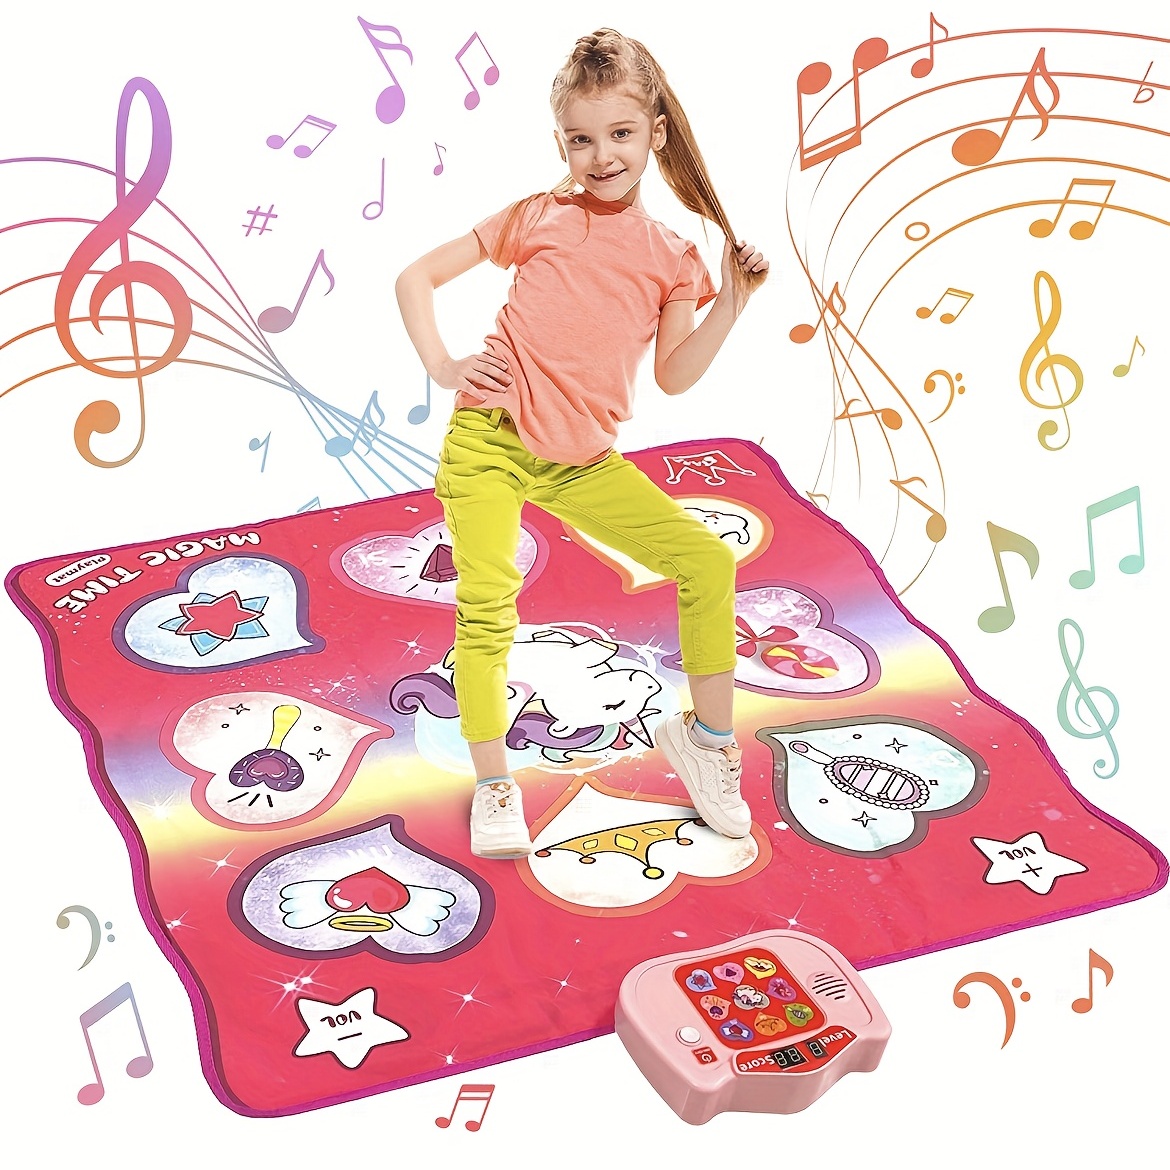  Electronic Dance Mat for Kids Girls Ages 3-12, Princess Themed  Dancing Play Pad Music Games with 9 Challenge Levels, Double PK Mode,  Christmas Birthday Gifts Toys for 3 4 5 6